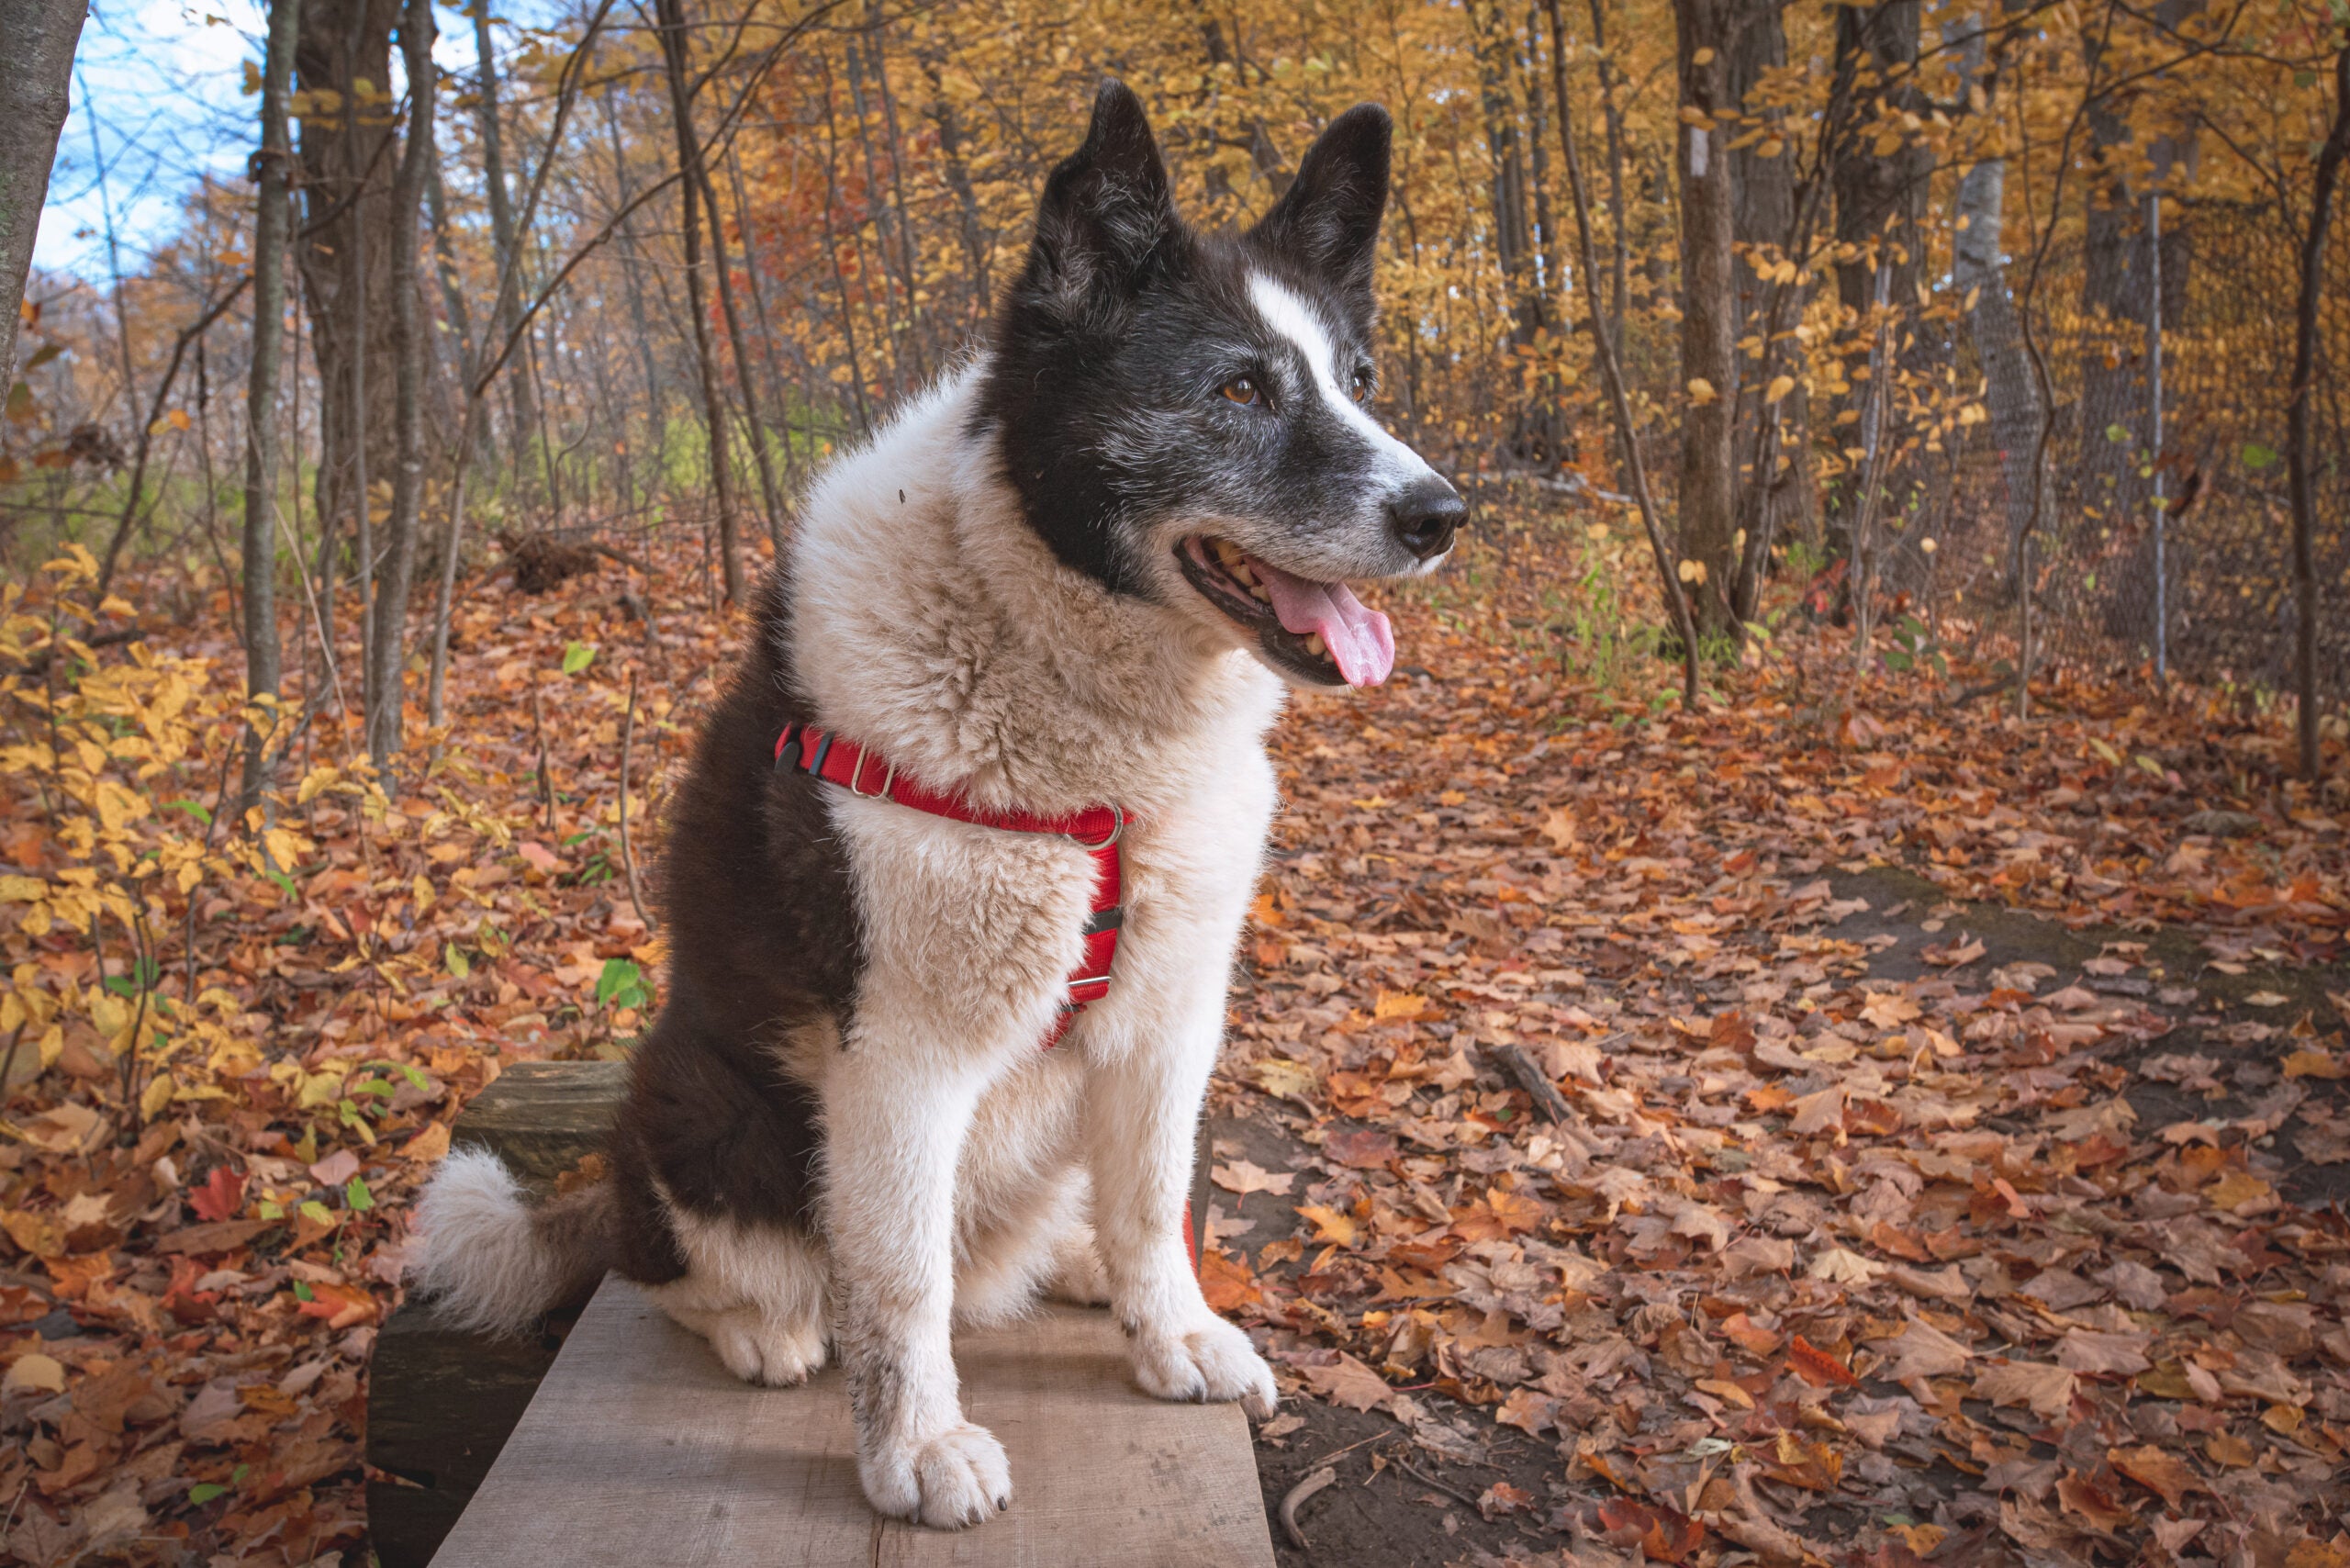 Karelian Bear dog sitting on a wooden bench in the forest. Leaves on the ground and fall colors in the background.